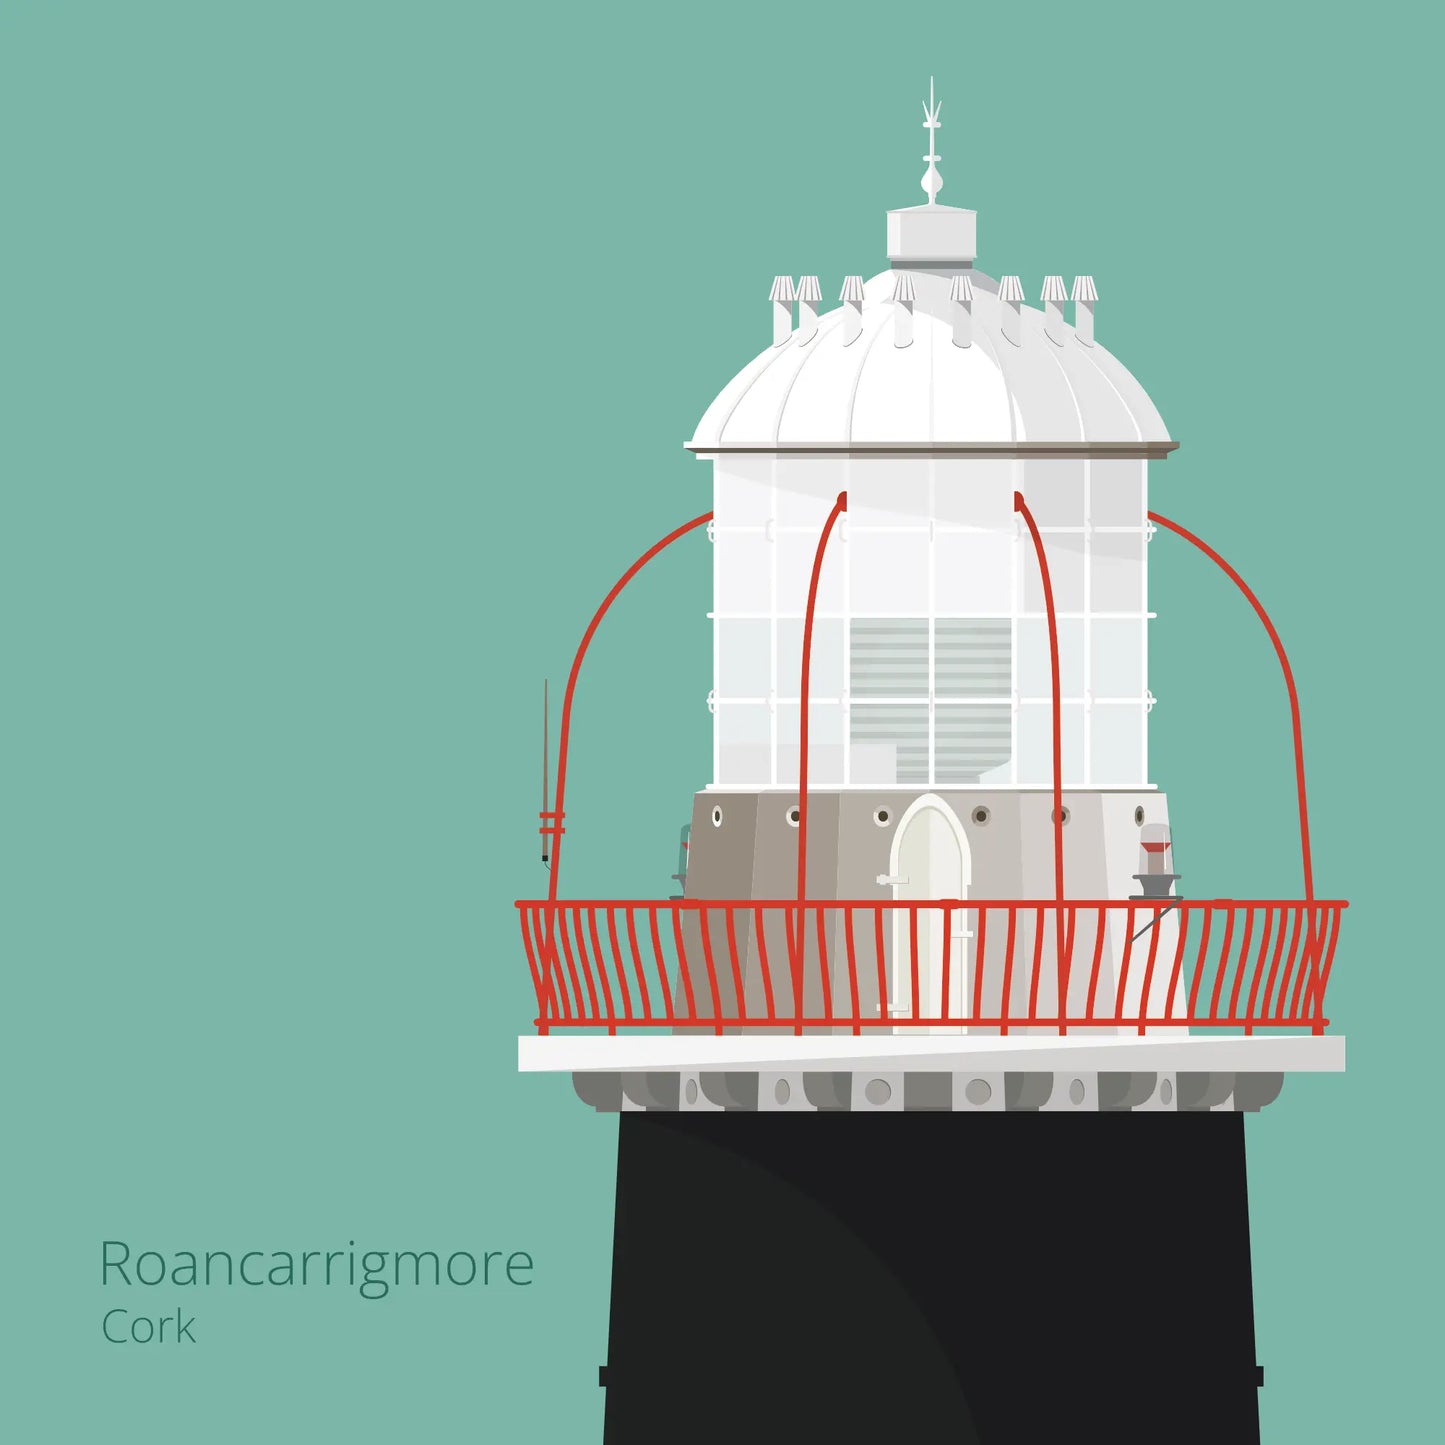 Illustration of Roancarrigmore lighthouse on an ocean green background